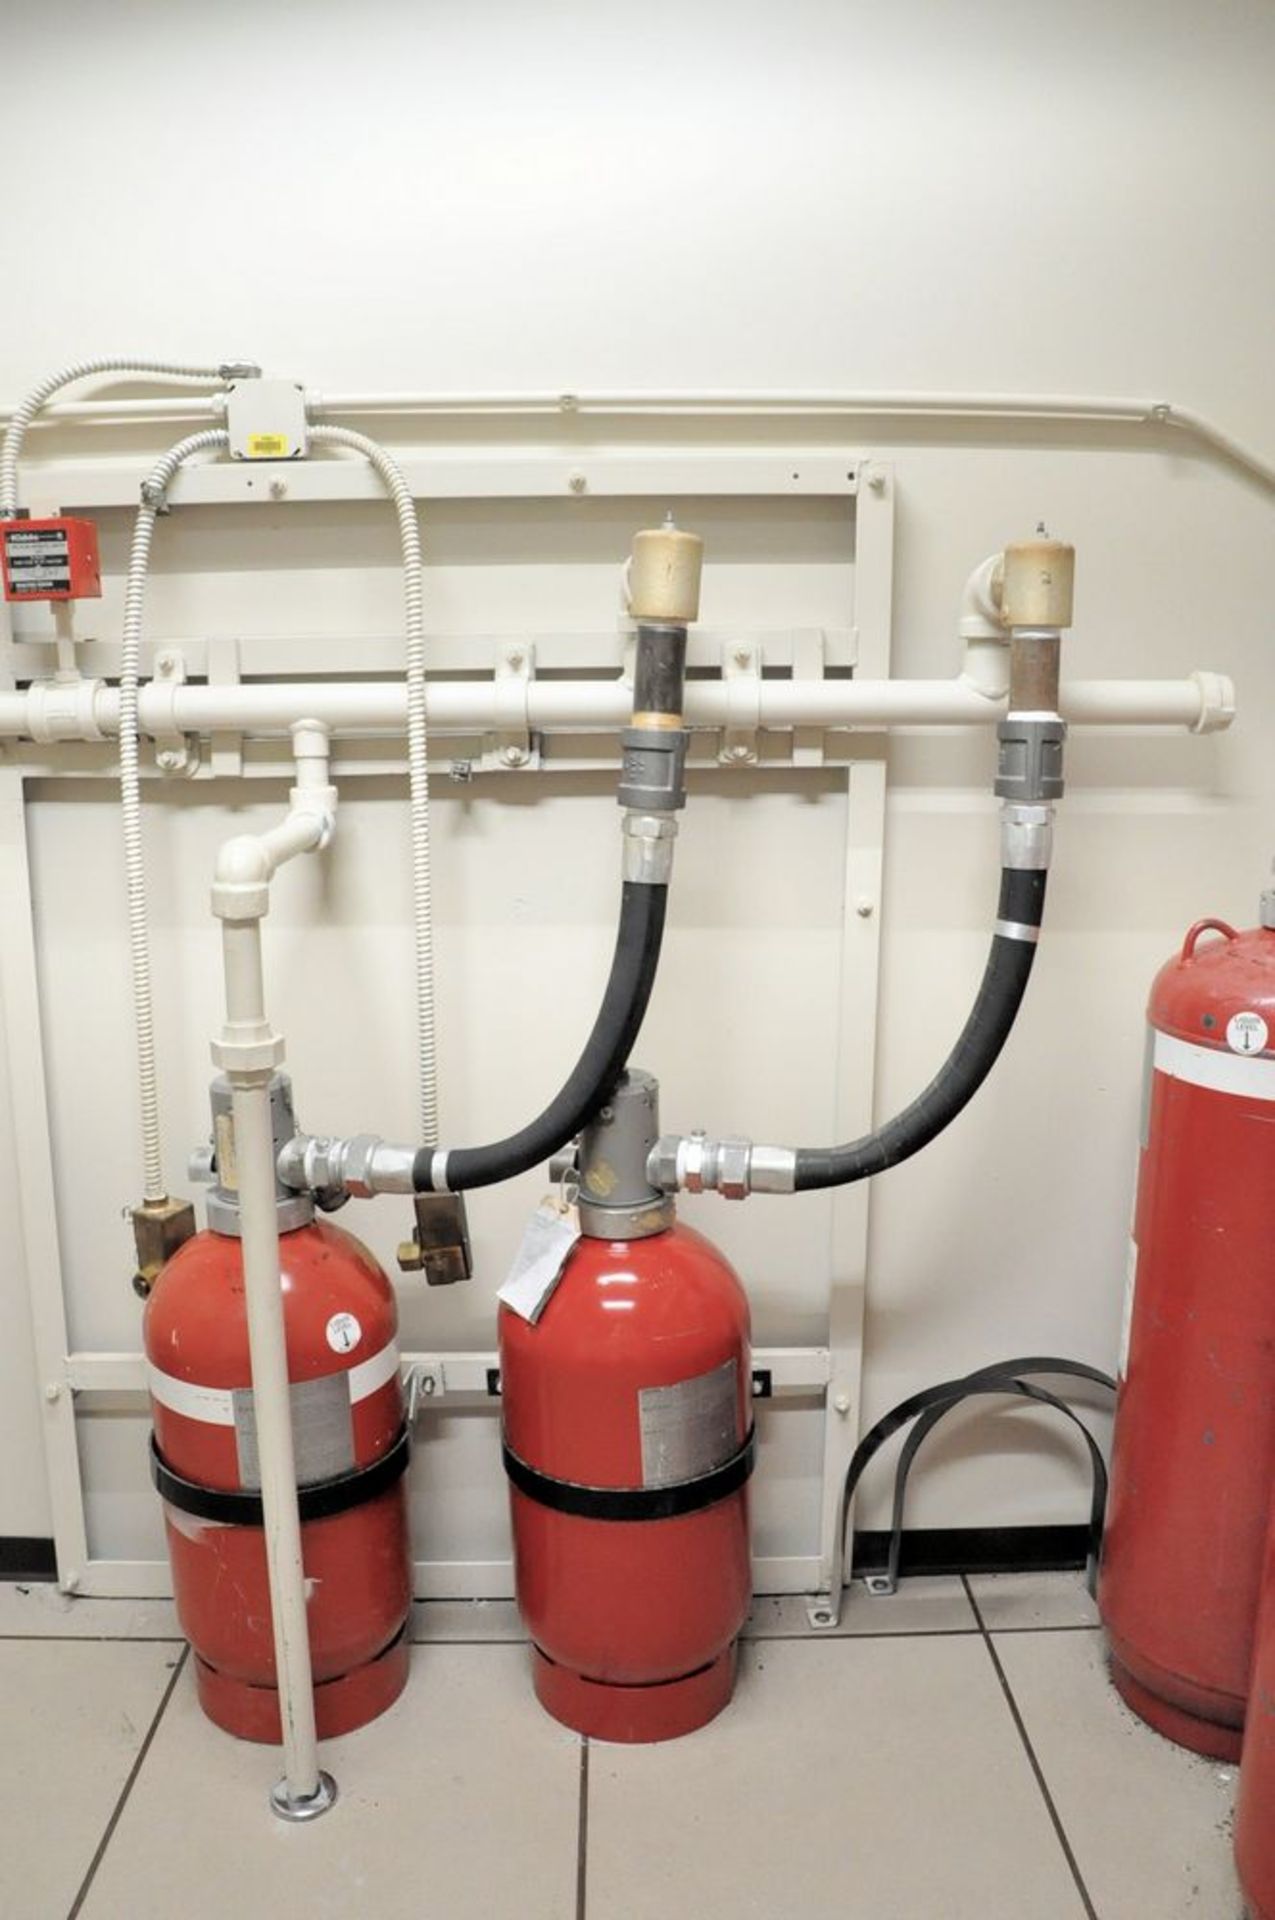 Lot-Fire Suppression System with (8) Tanks - Image 3 of 3